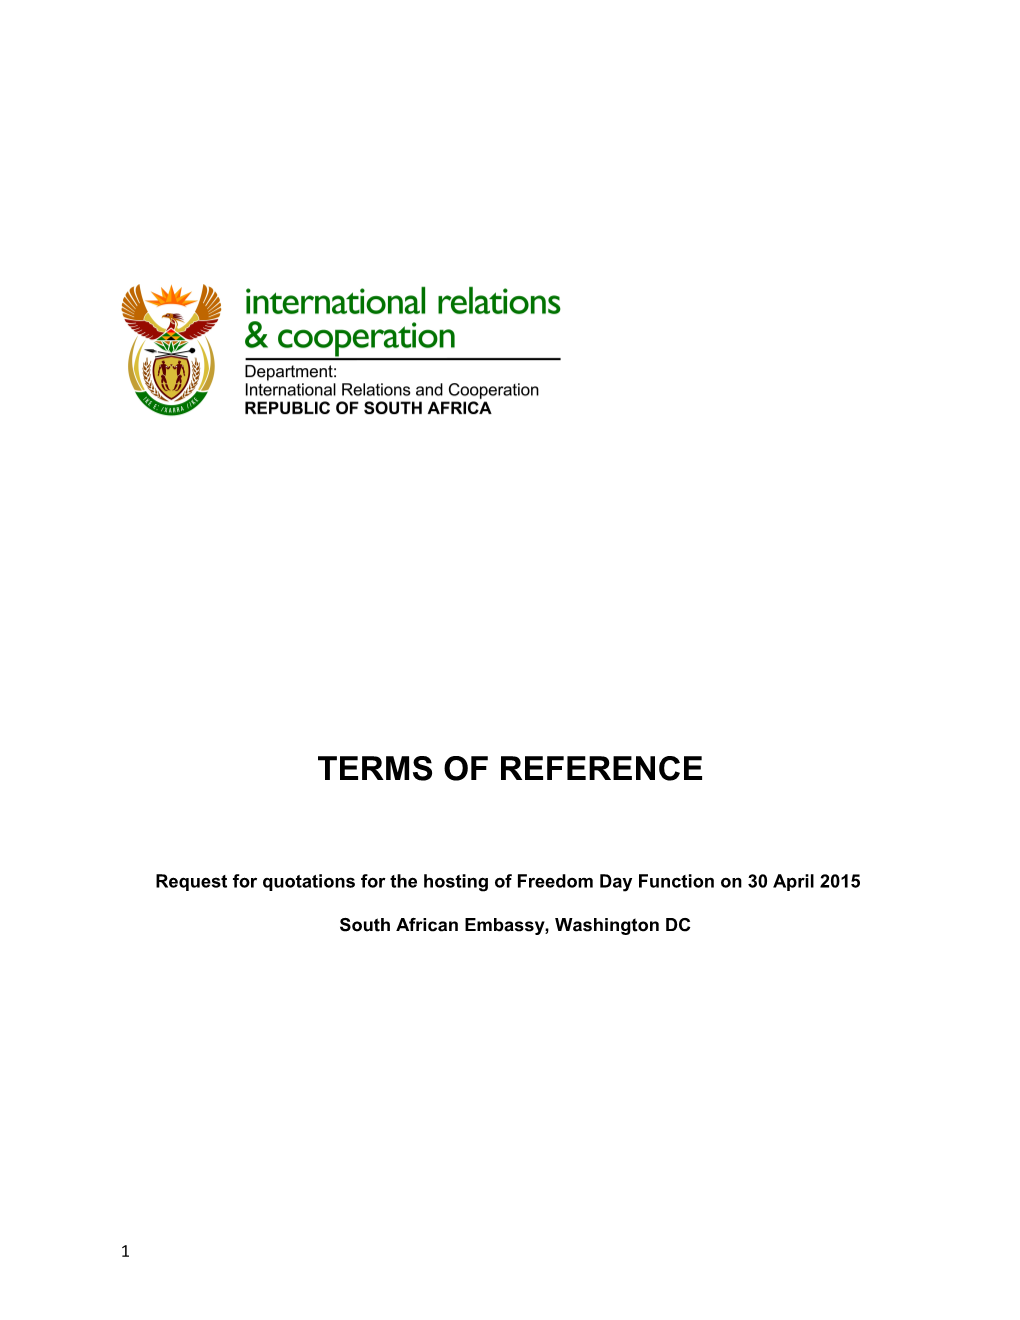 Terms of Reference s18